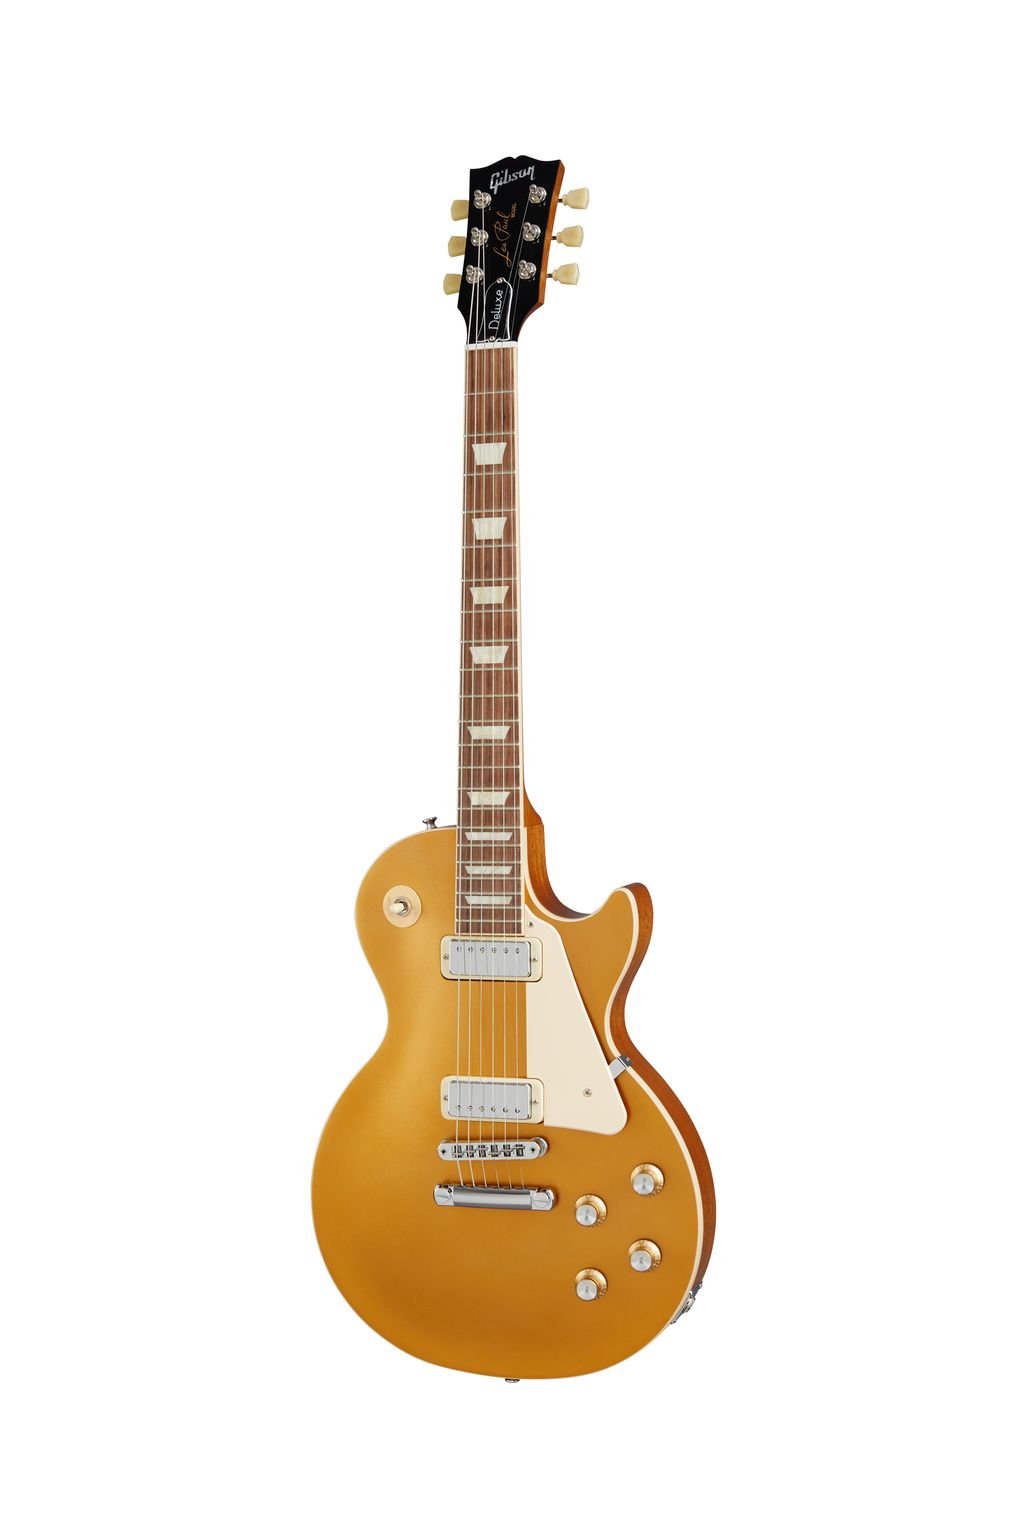 __static.gibson.com_product-images_USA_USAMRP793_Gold_Top_LPDX00GTCH1_front